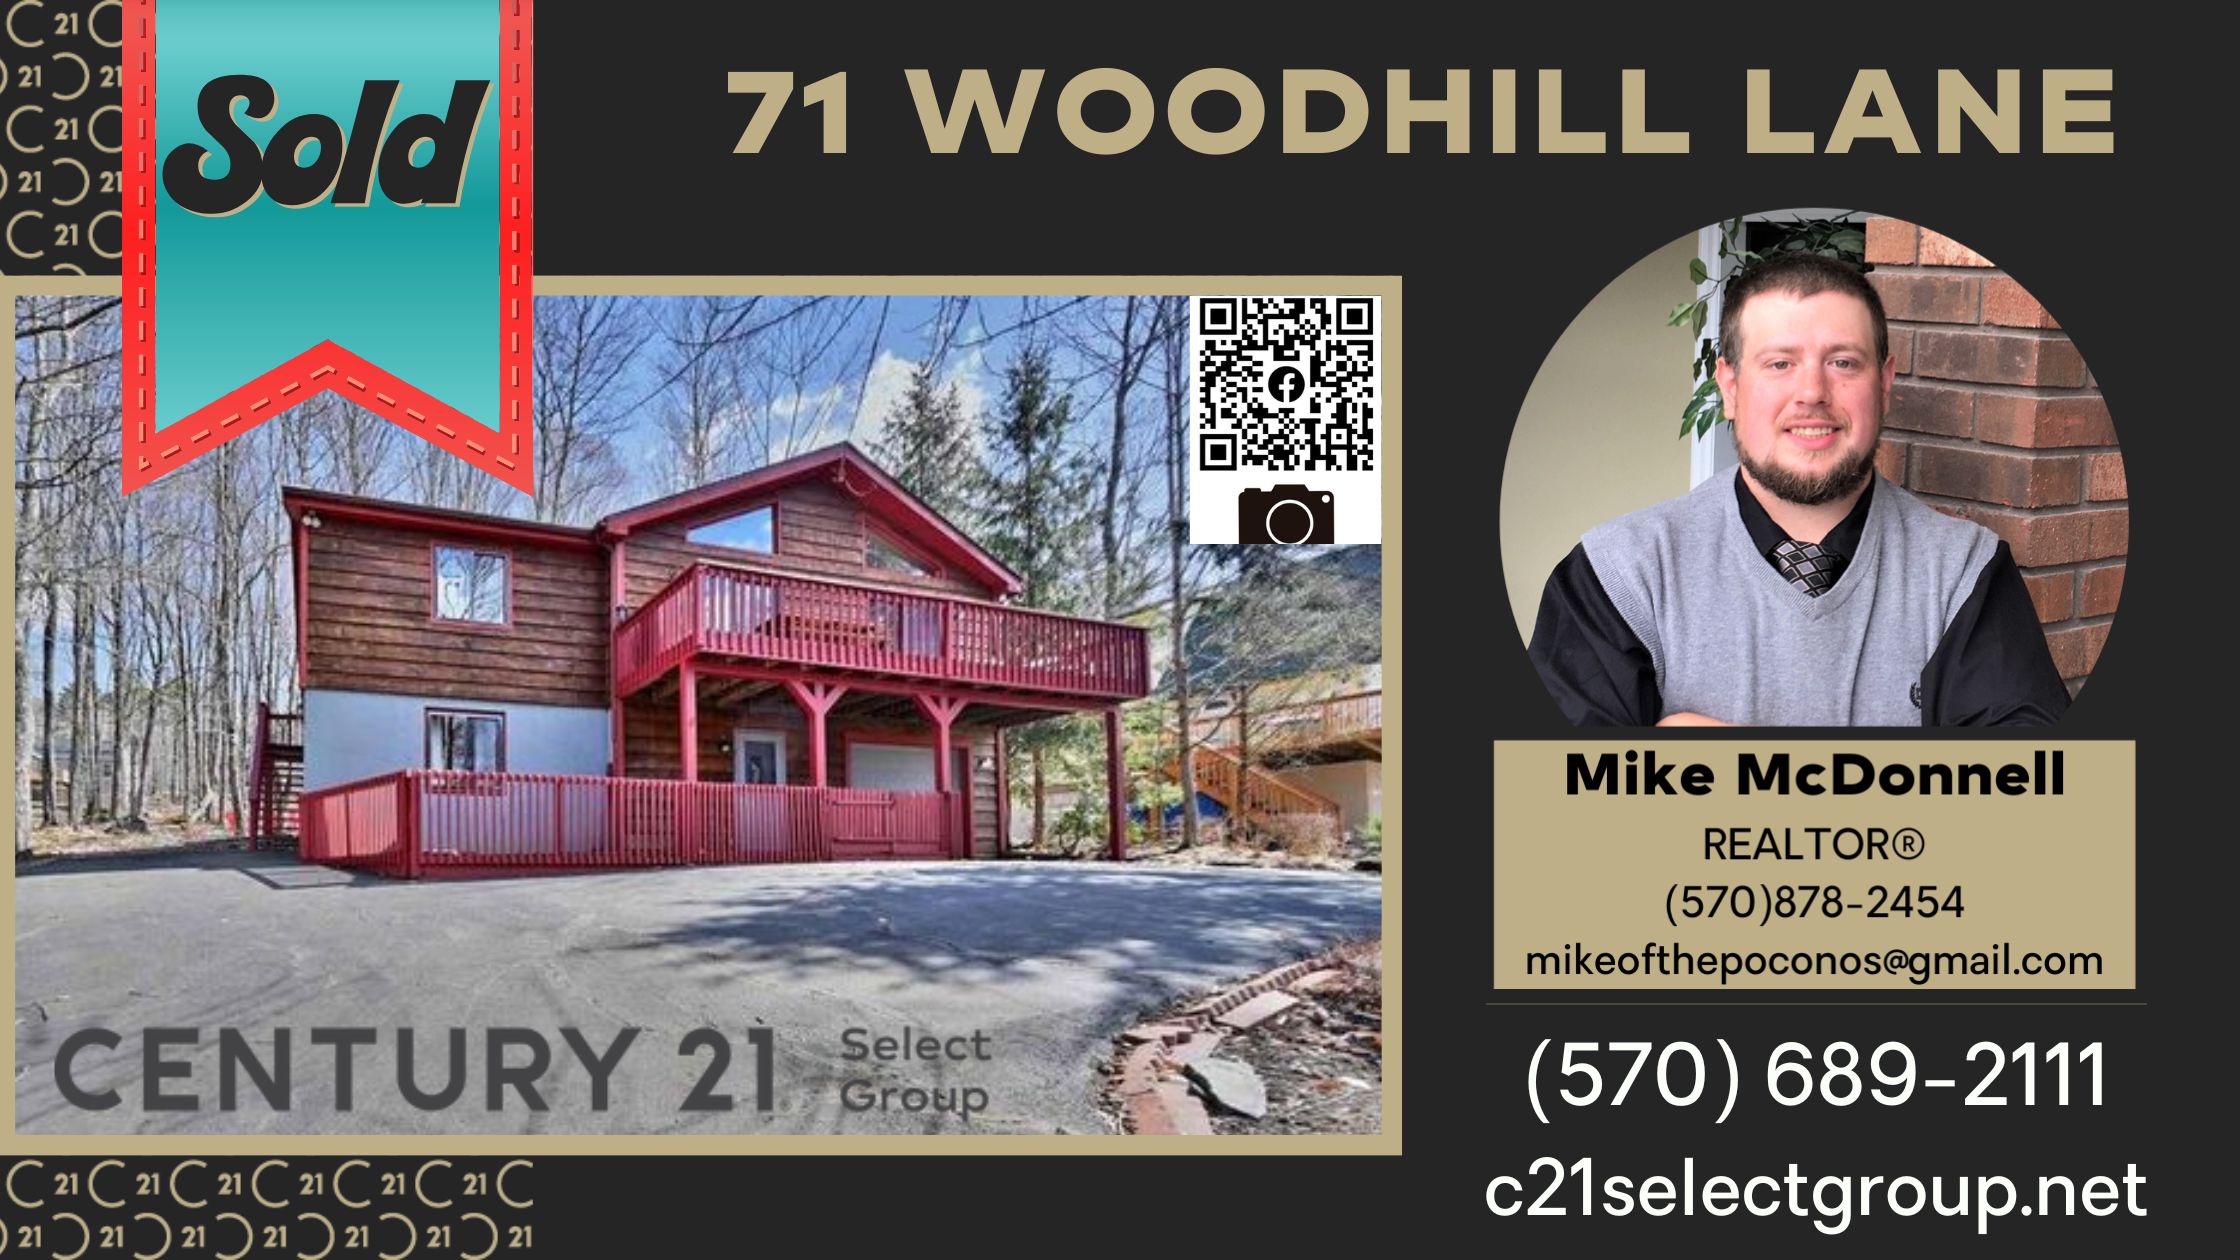 SOLD! 71 Woodhill Lane: The Hideout